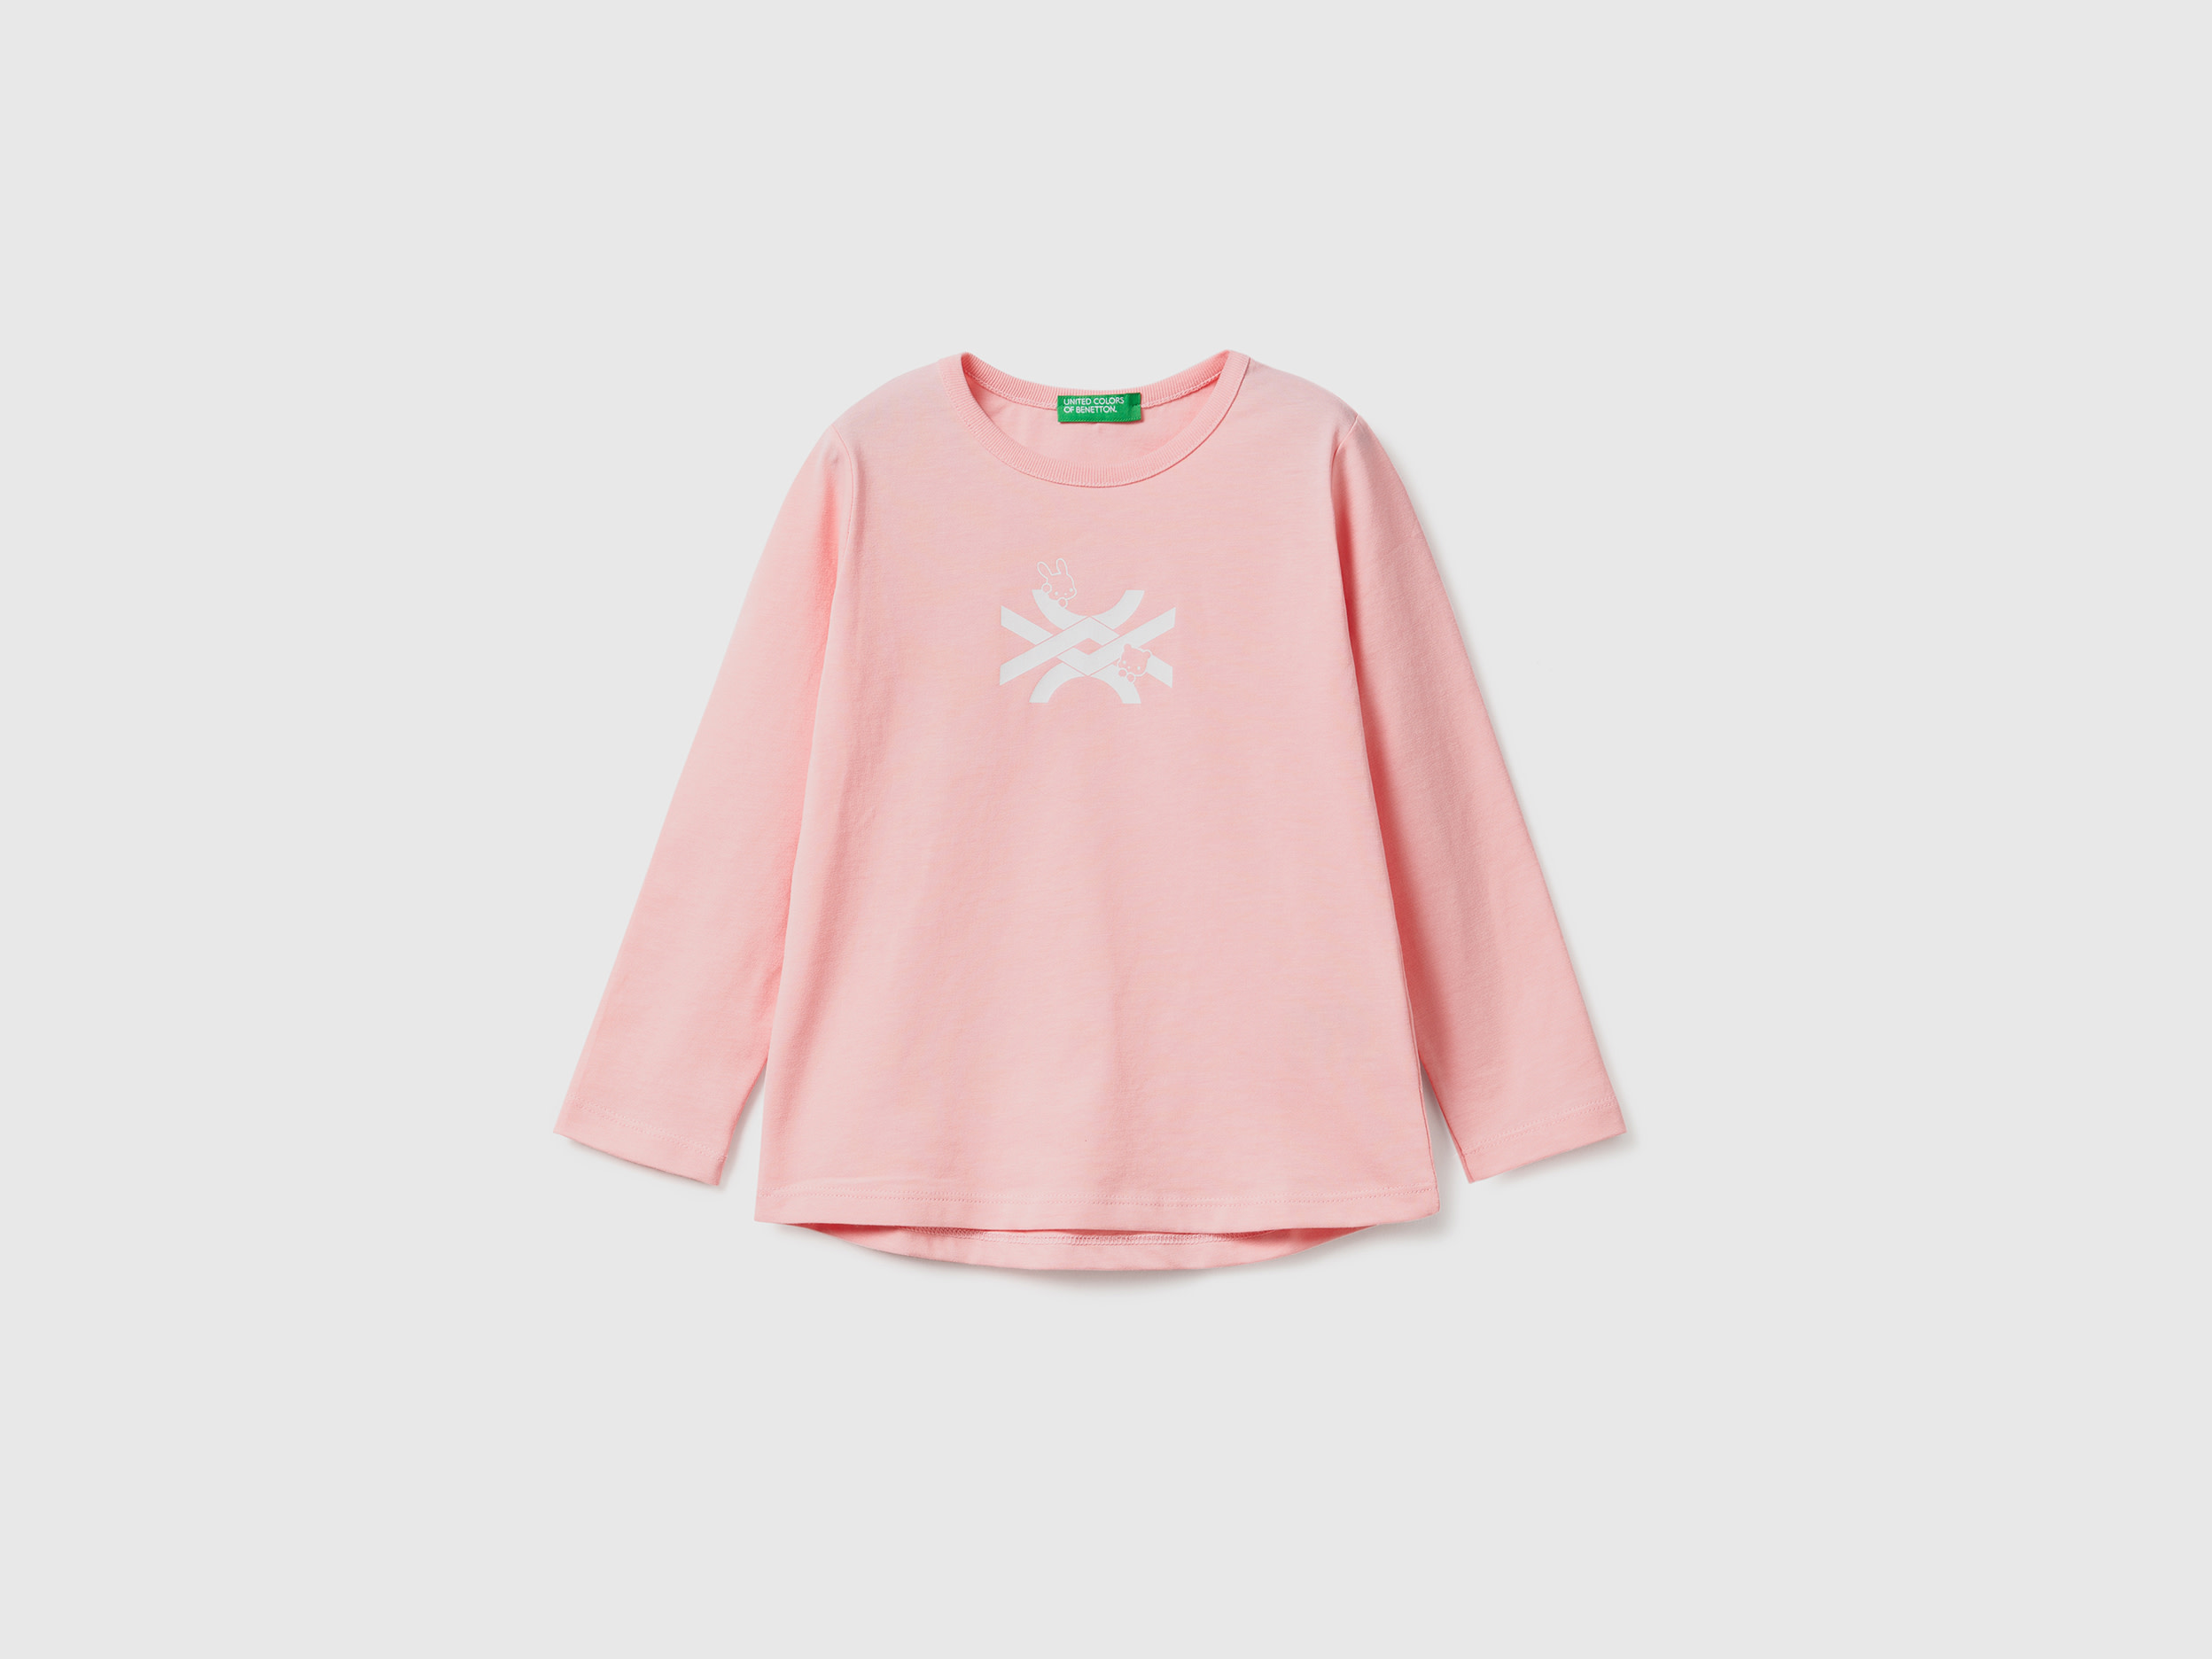 Benetton, 100% Cotton T-shirt With Logo, size 3-4, Pink, Kids